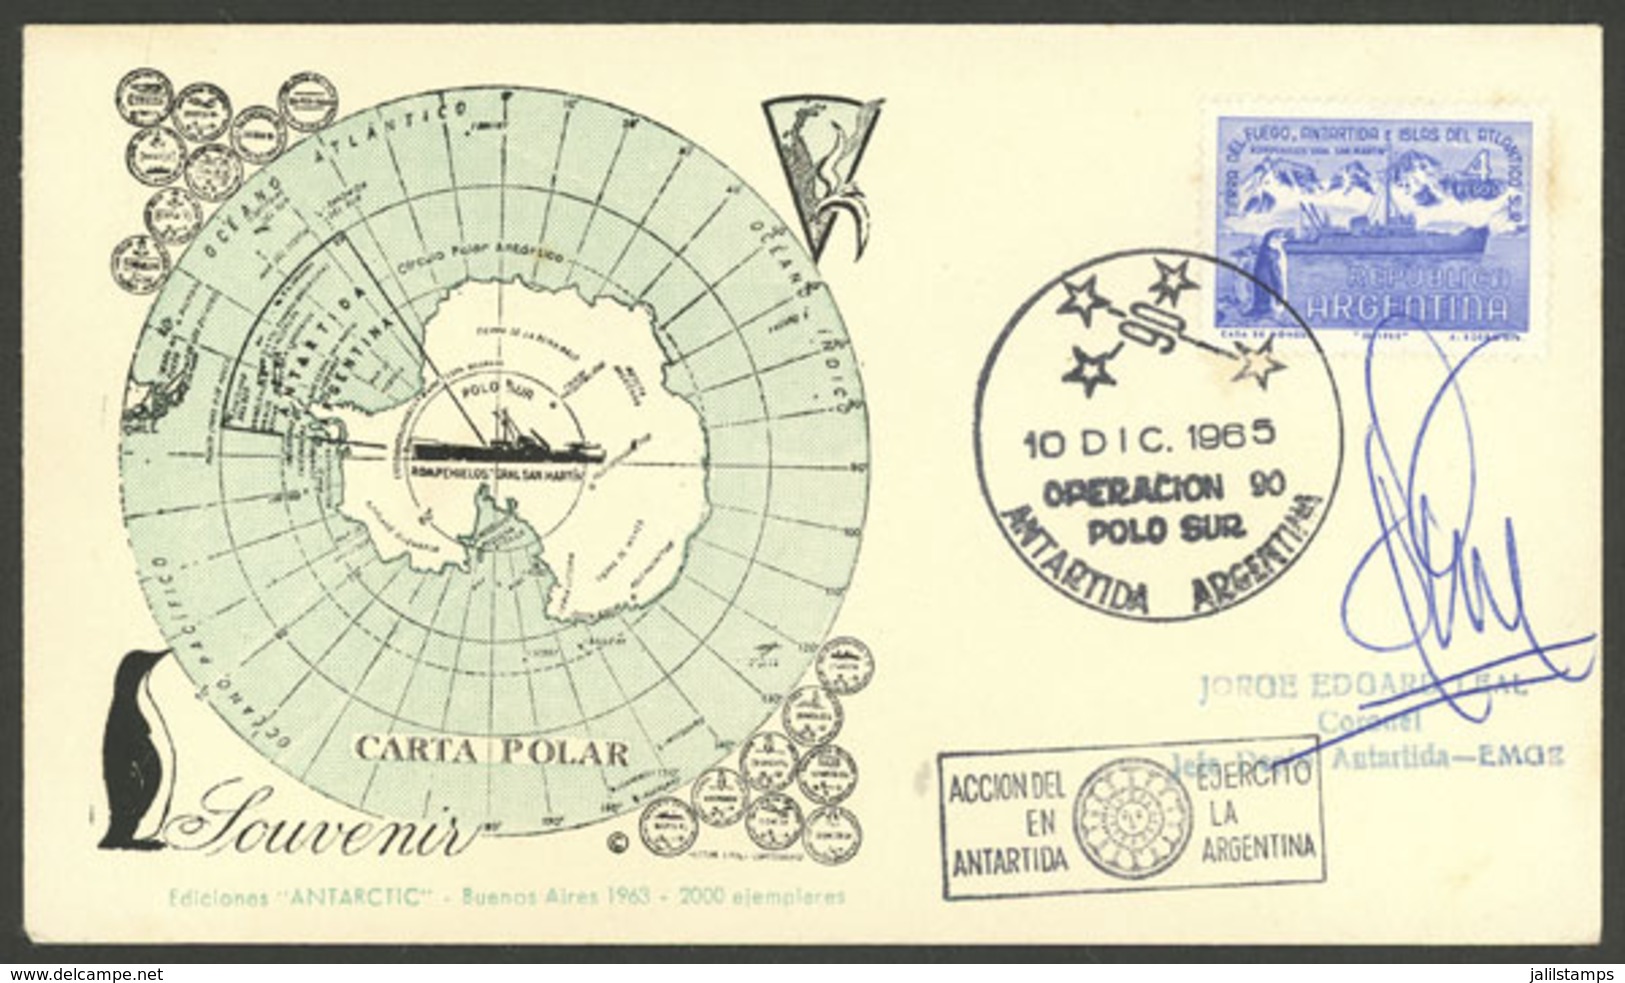 ARGENTINE ANTARCTICA: Cover Commemorating The "Operación 90" Expedition To The South Pole, Signed By Cnel. Jorge Leal, C - Covers & Documents